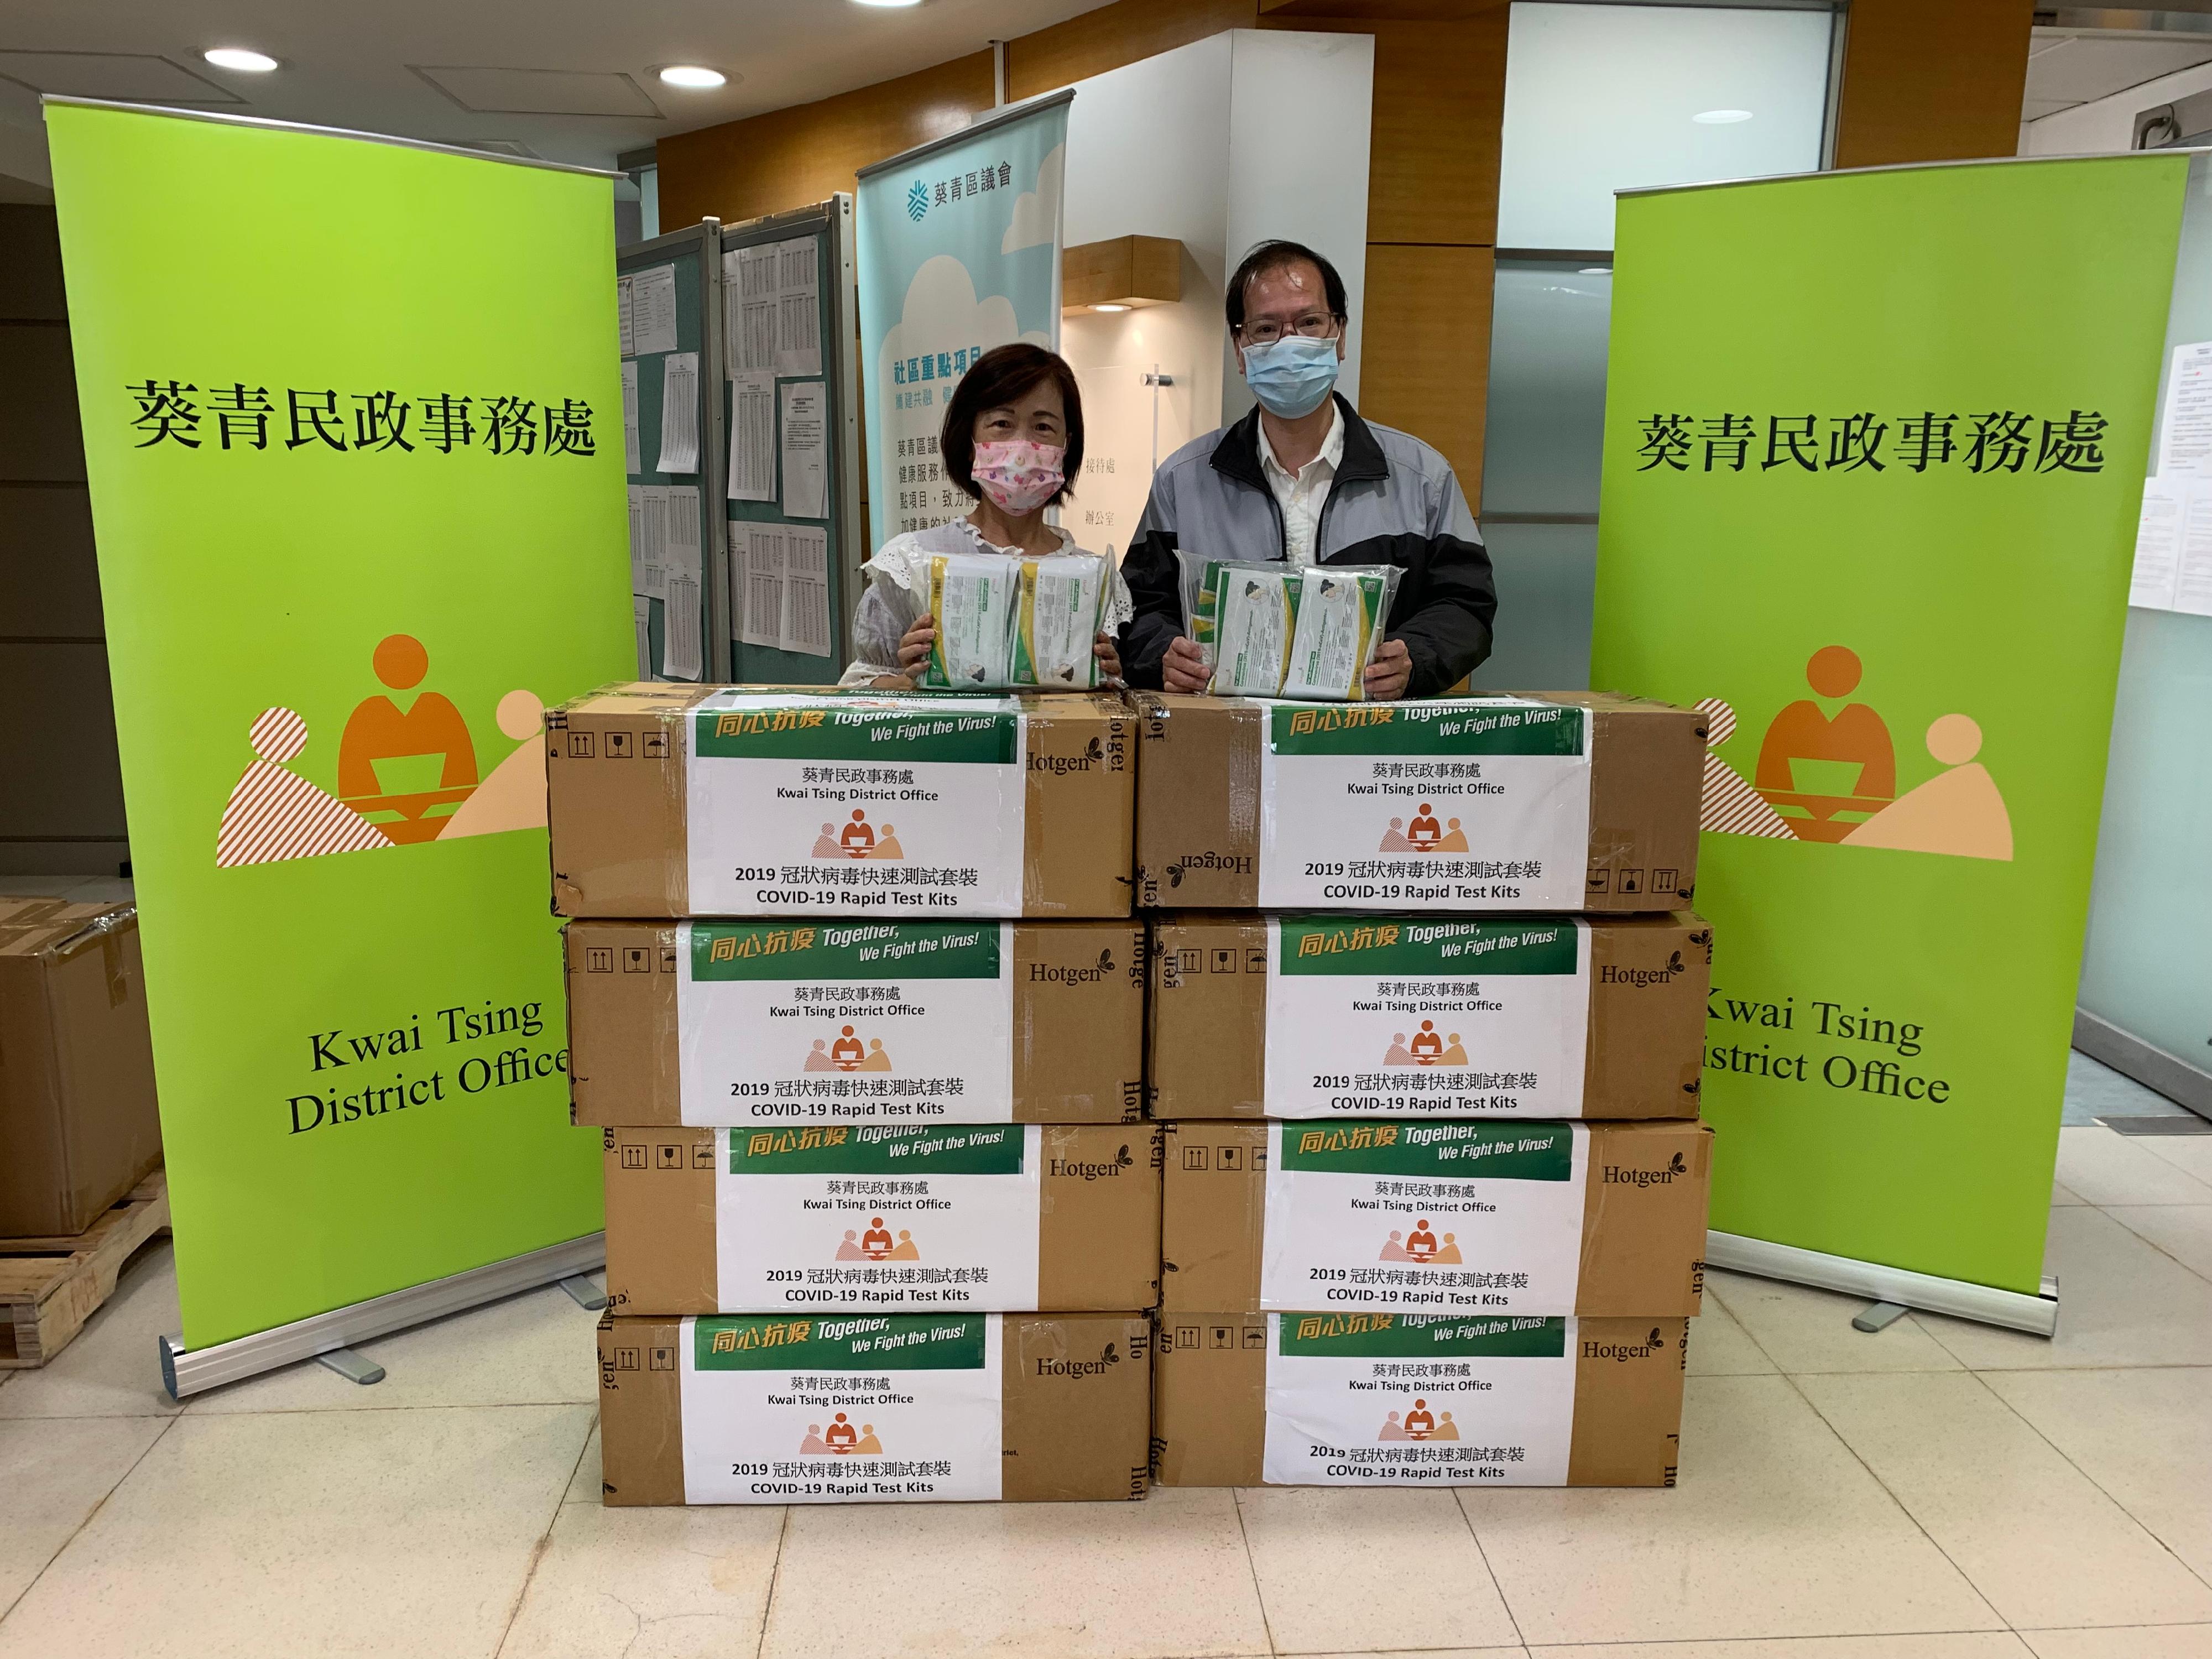 The Kwai Tsing District Office today (May 26) distributed COVID-19 rapid test kits to households, cleansing workers and property management staff living and working in Kam Wa Building for voluntary testing through the property management company and the owners' corporation.